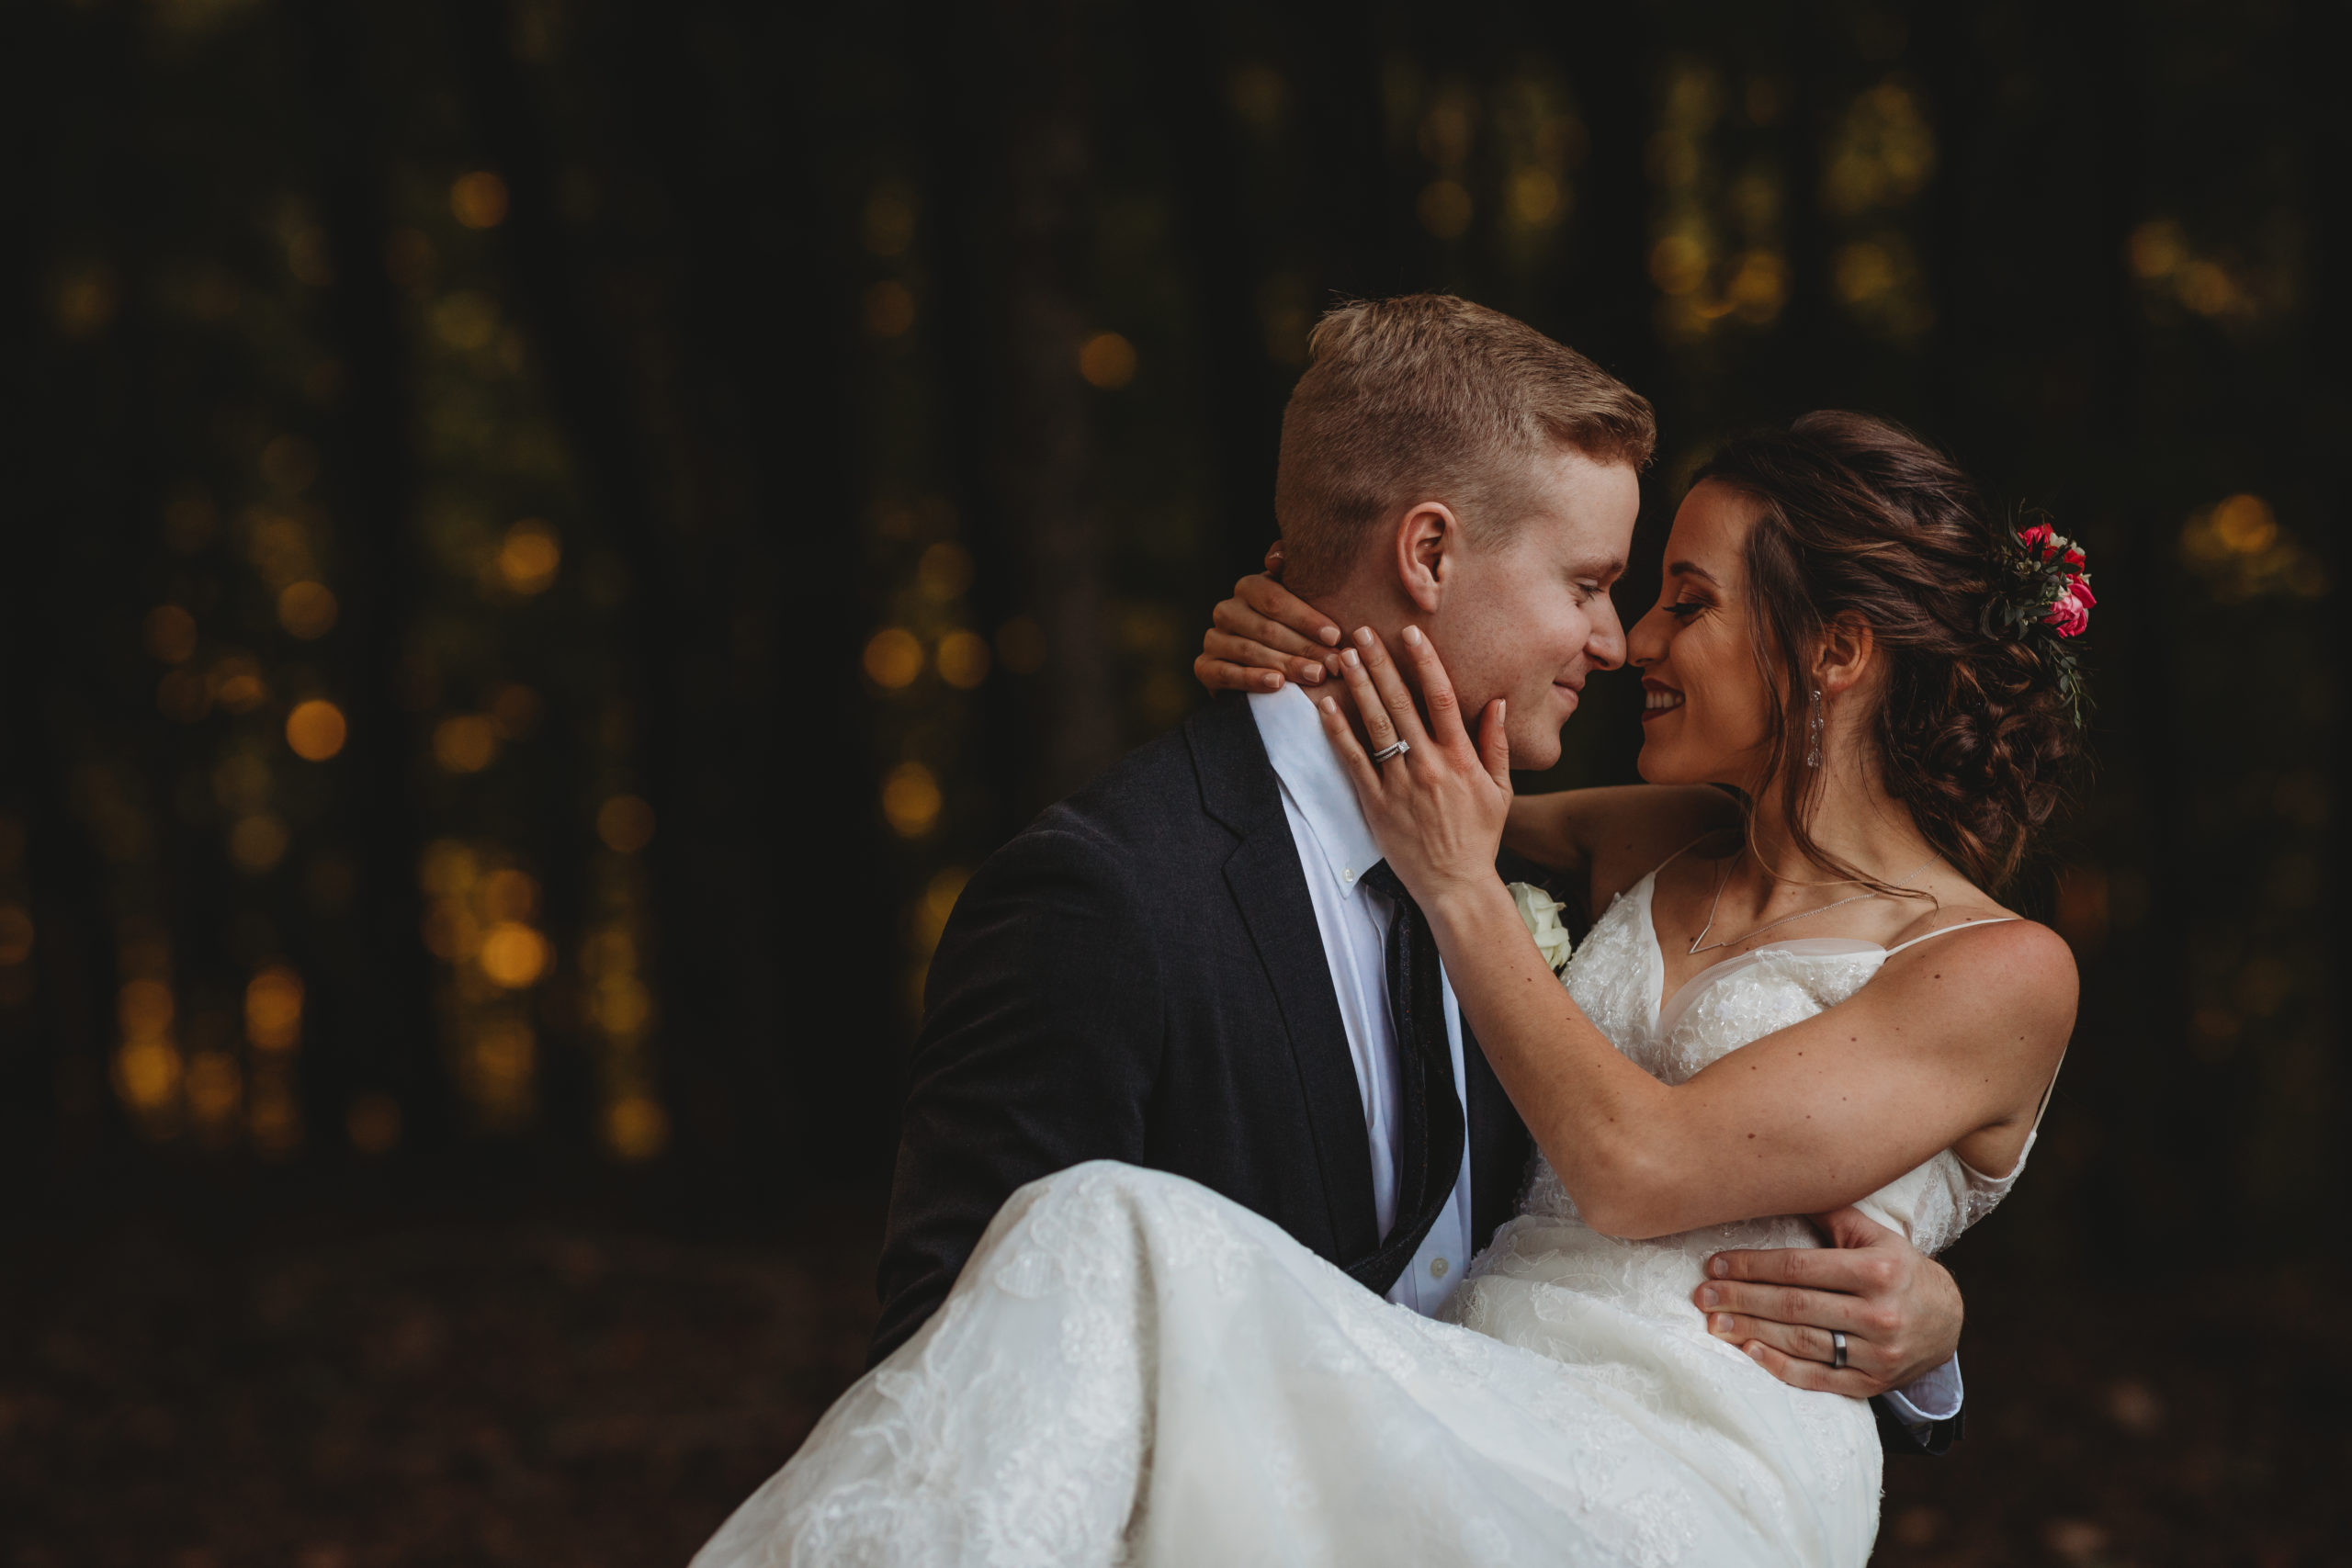 groom carrying bride through knoxville forest and celebrating recent marriage